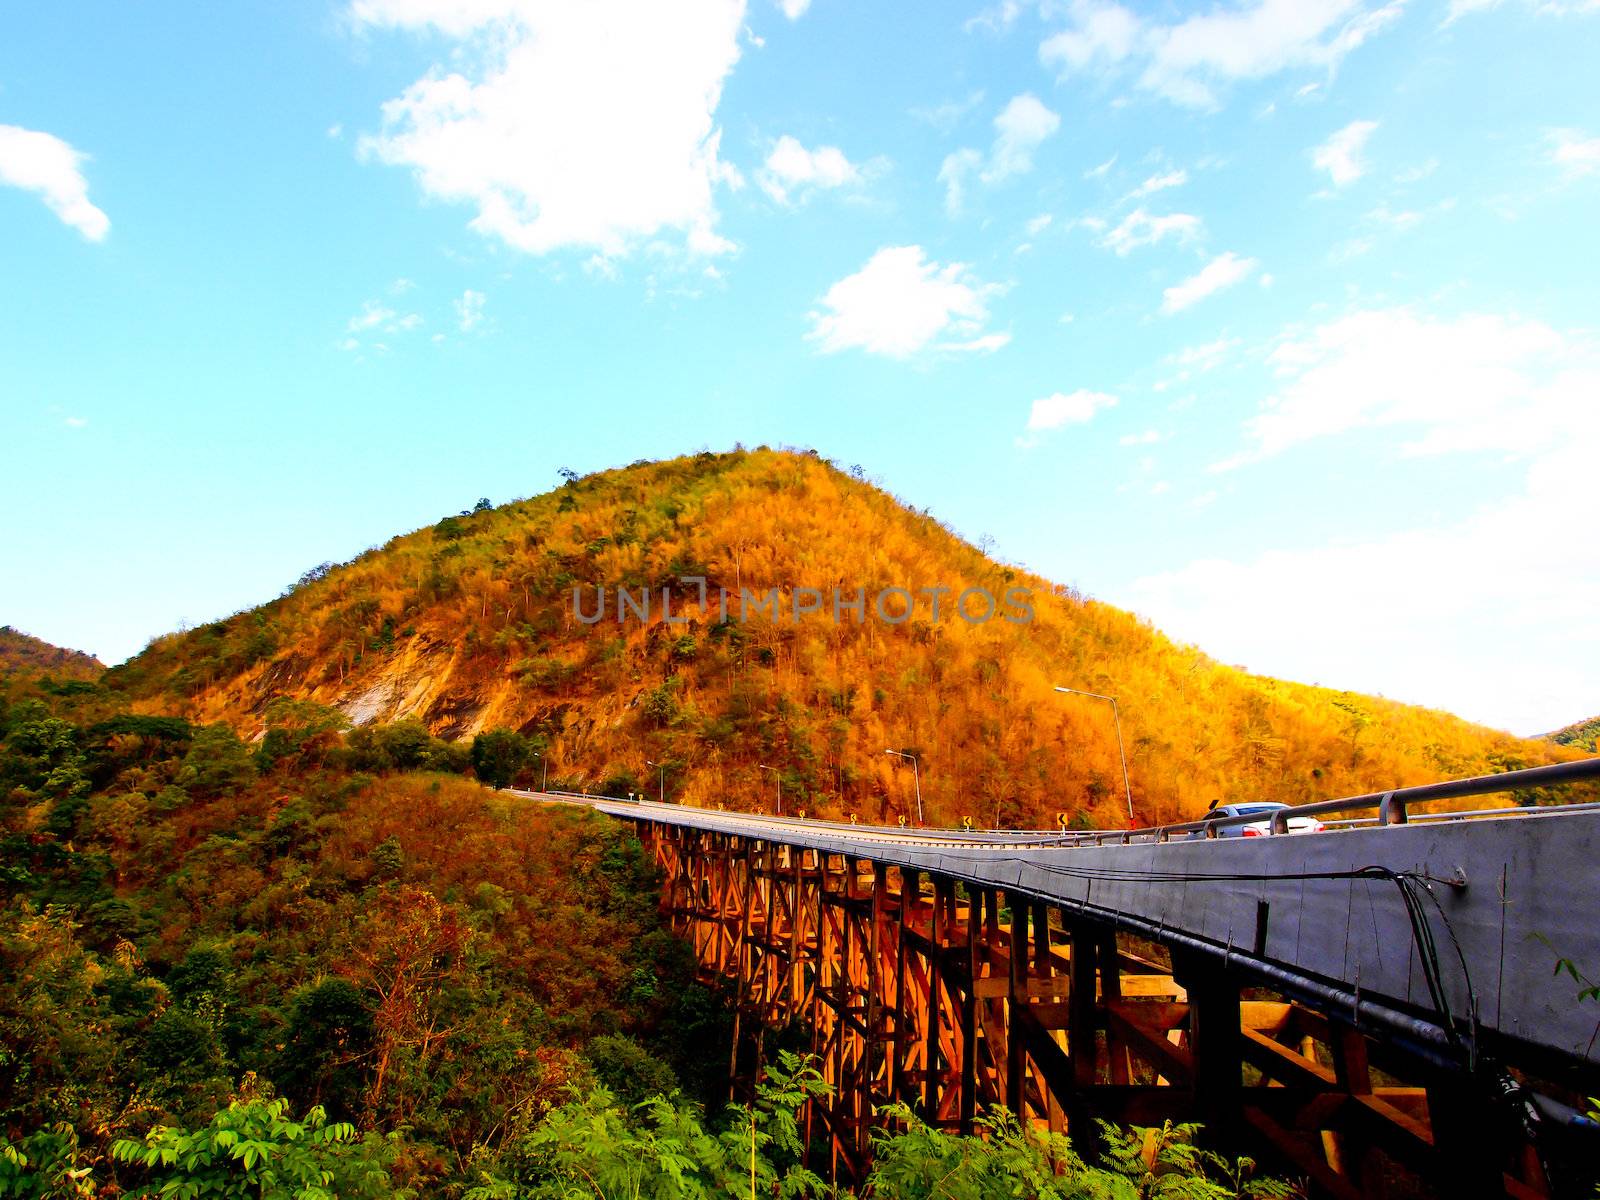 Mountain and bridge which have the tallest column in Thailand